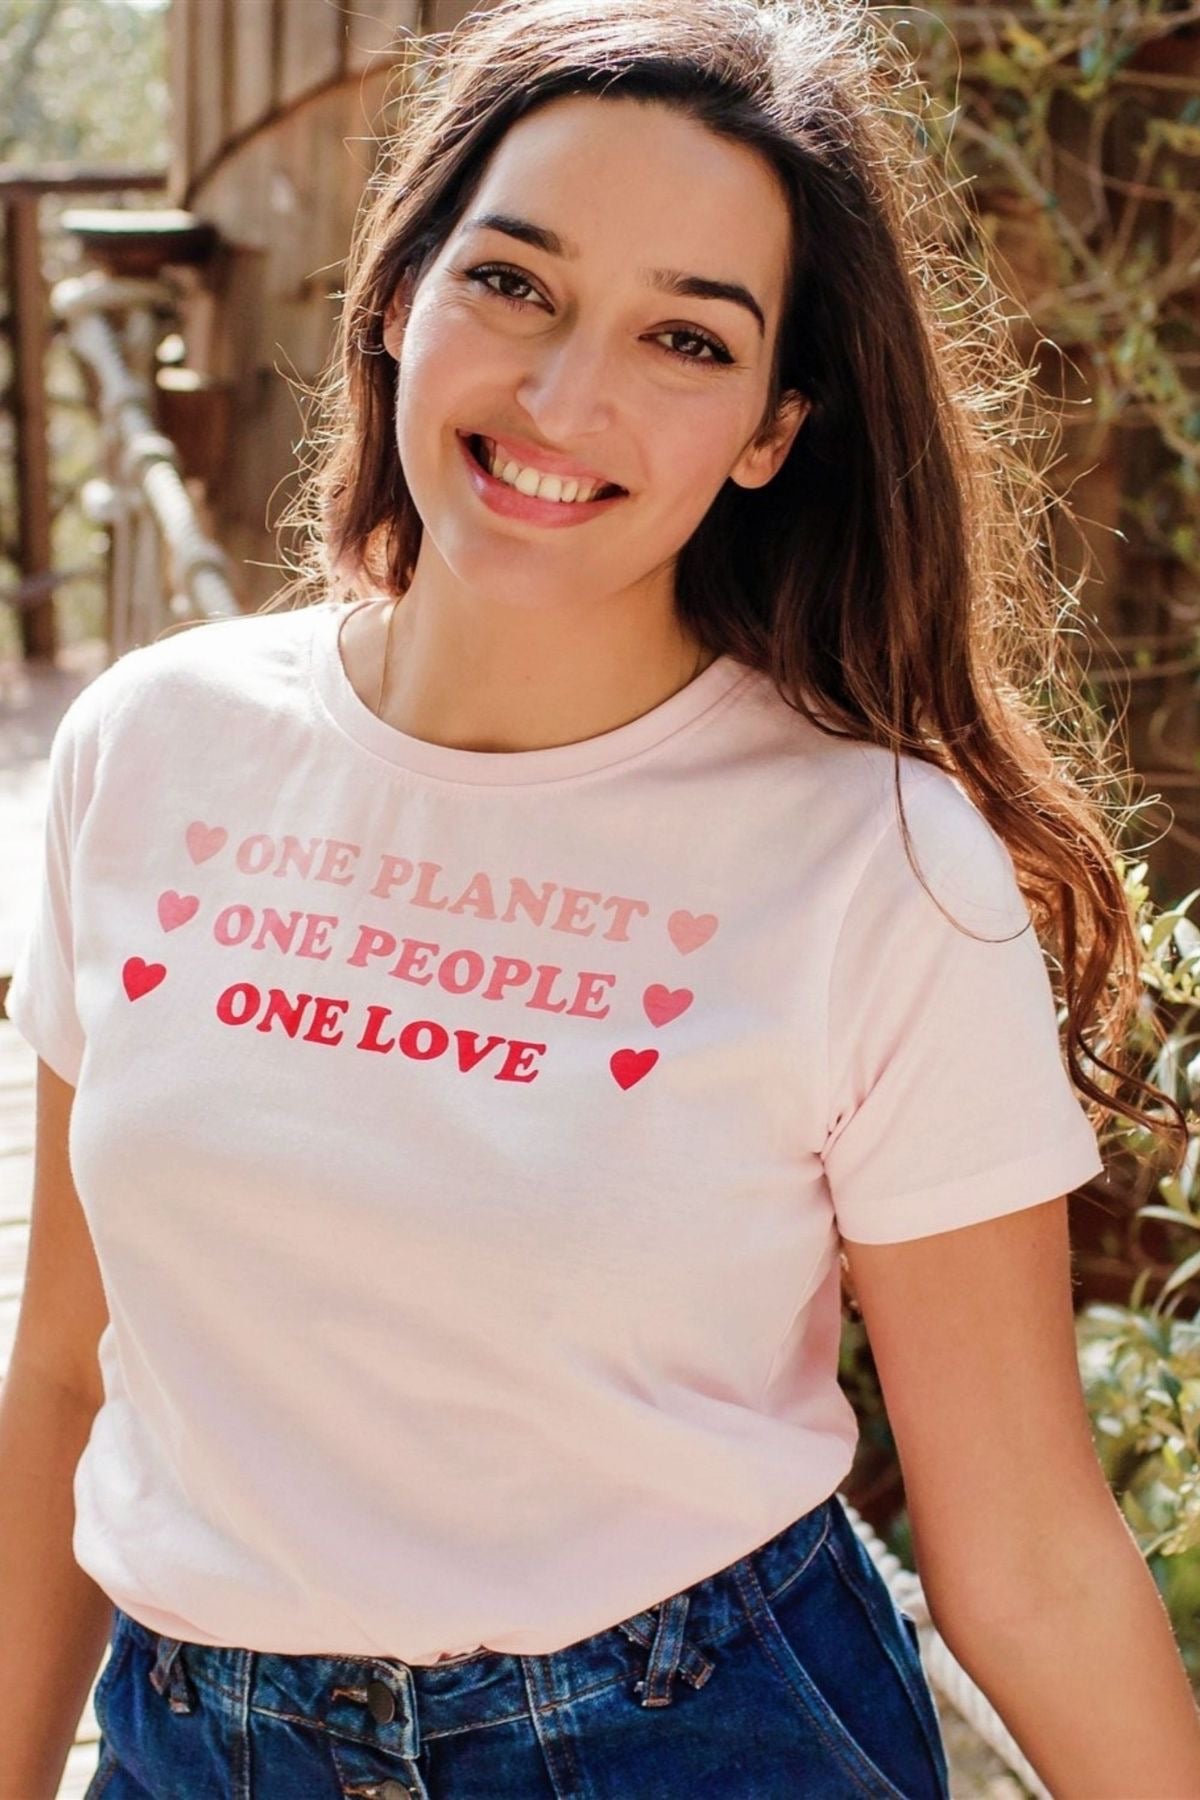 One Planet, One Love T-Shirt